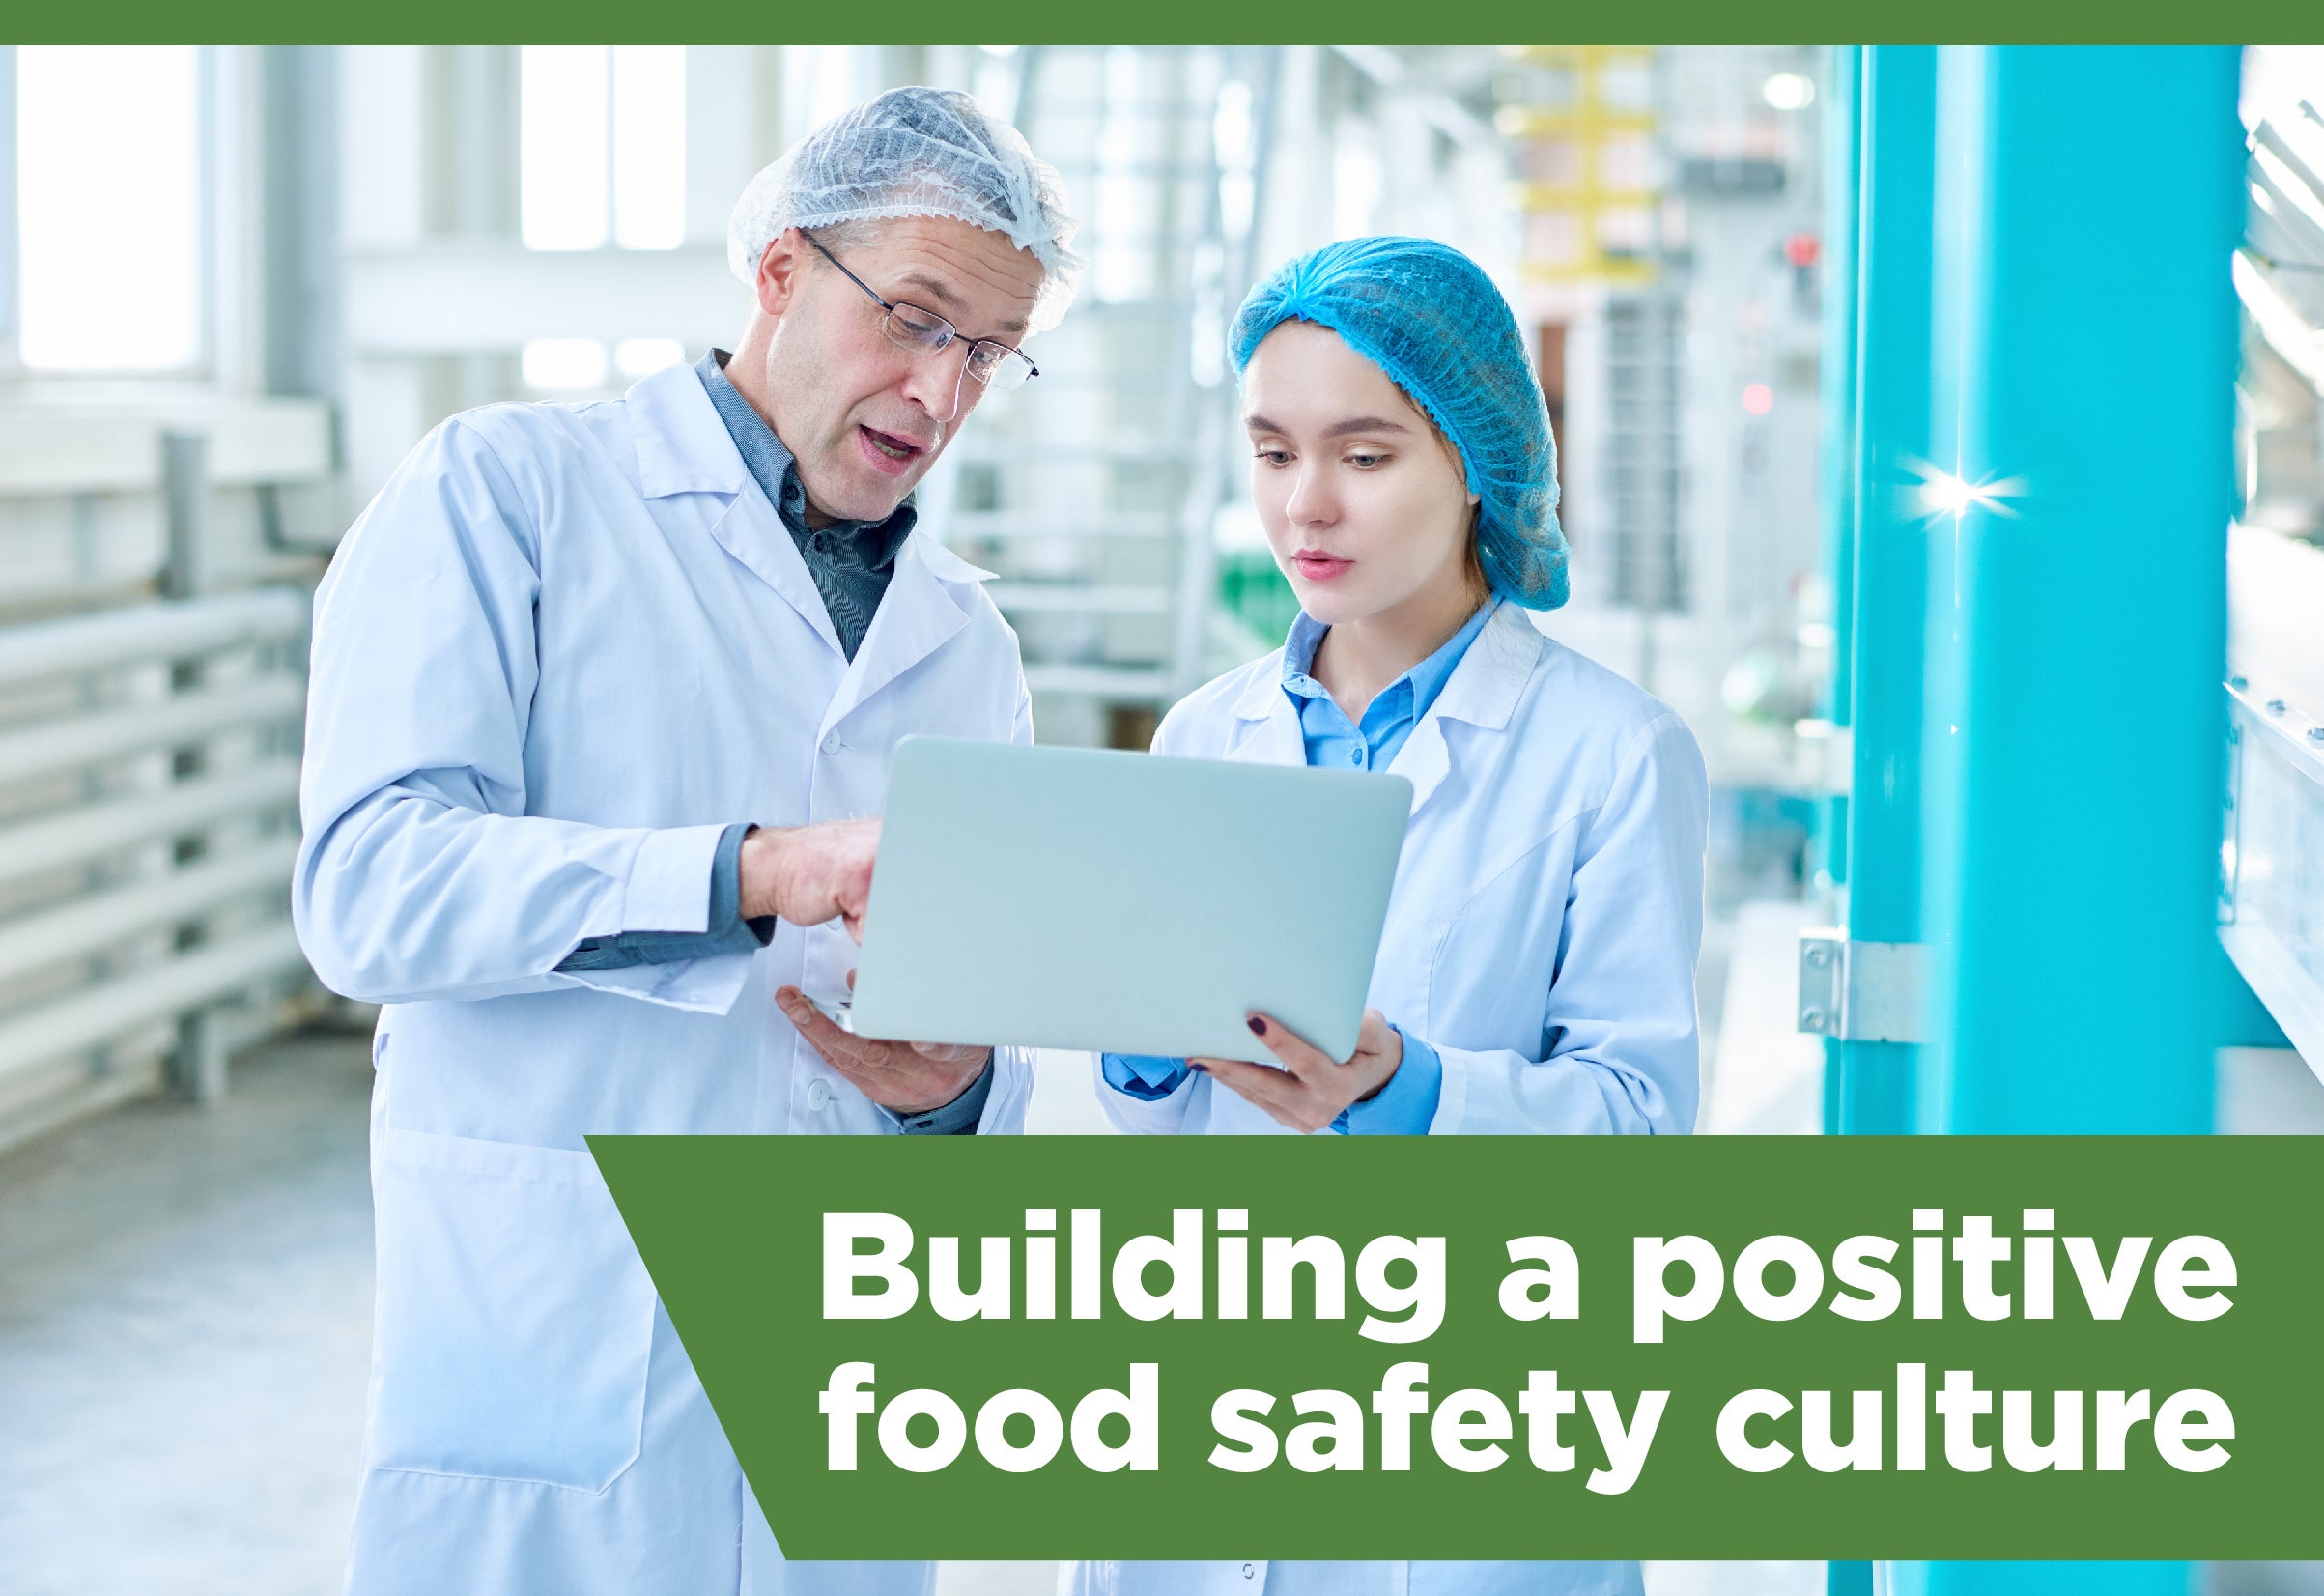 Beyond compliance: Building a positive food safety culture for sustainable success